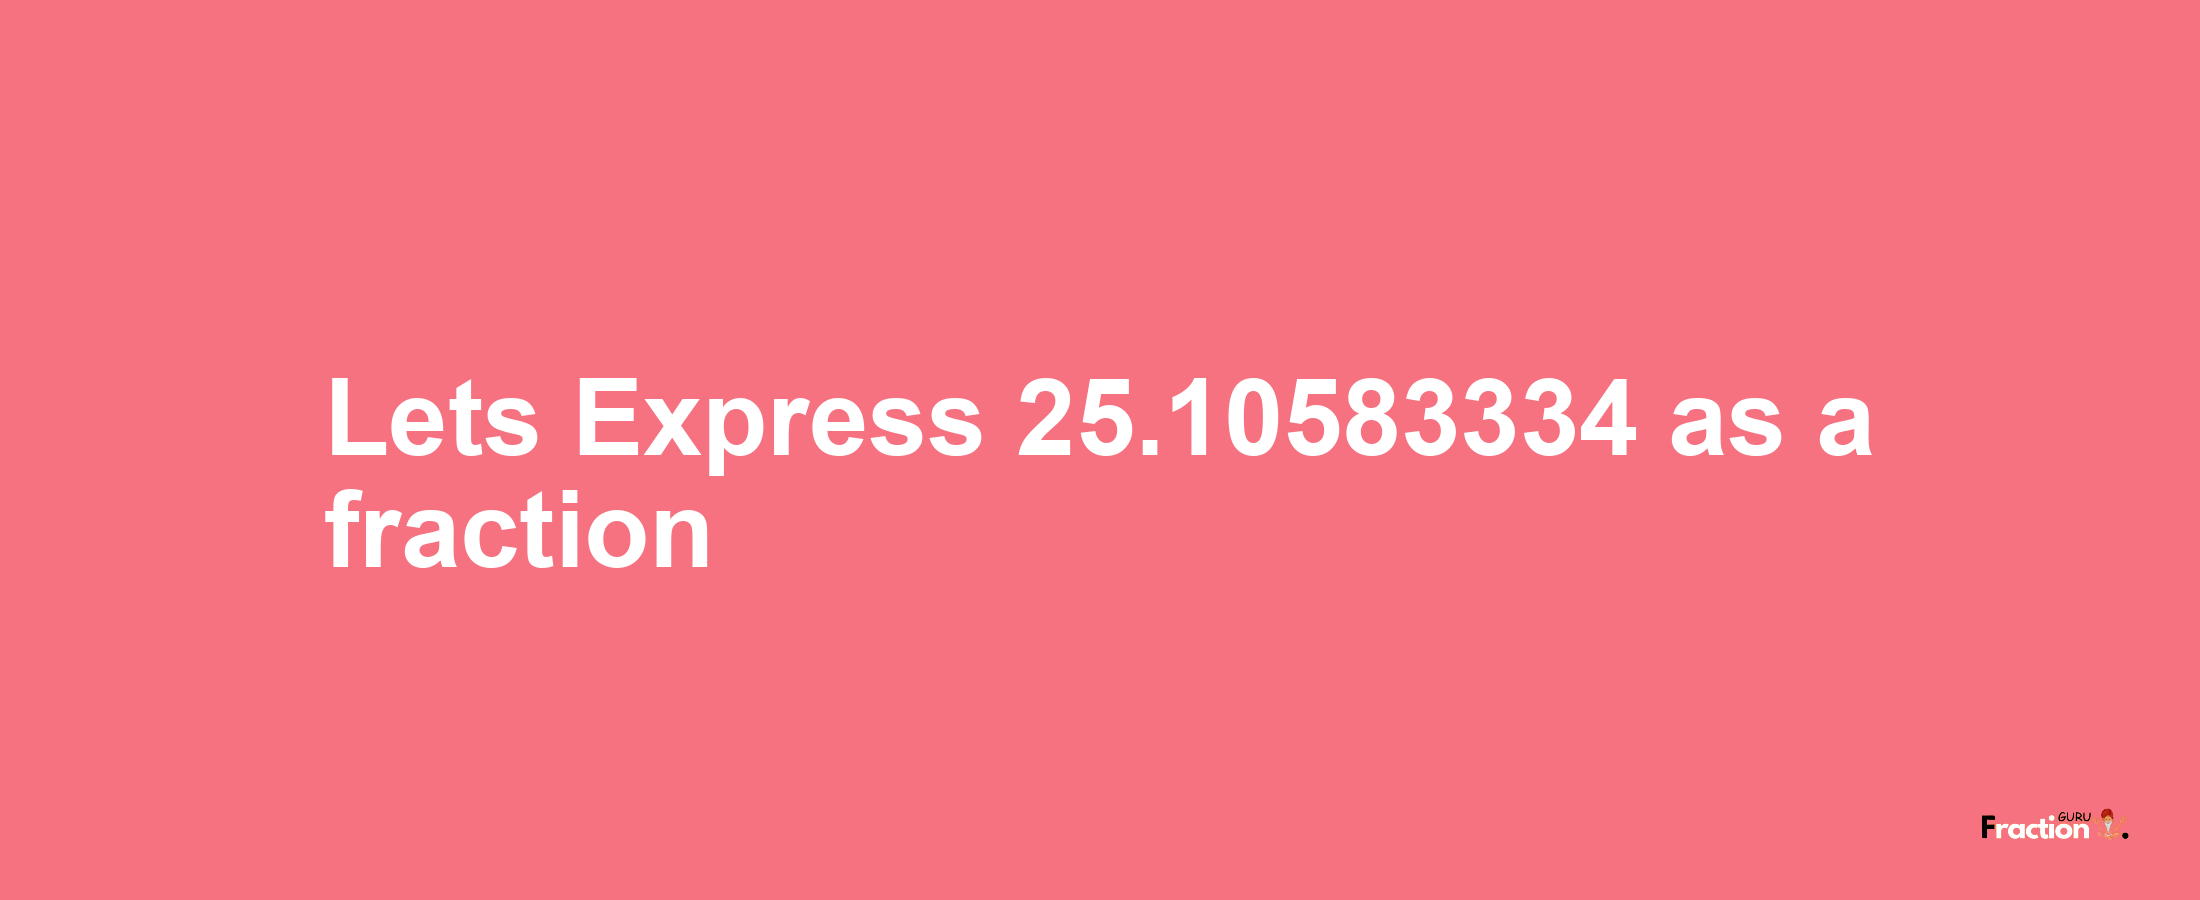 Lets Express 25.10583334 as afraction